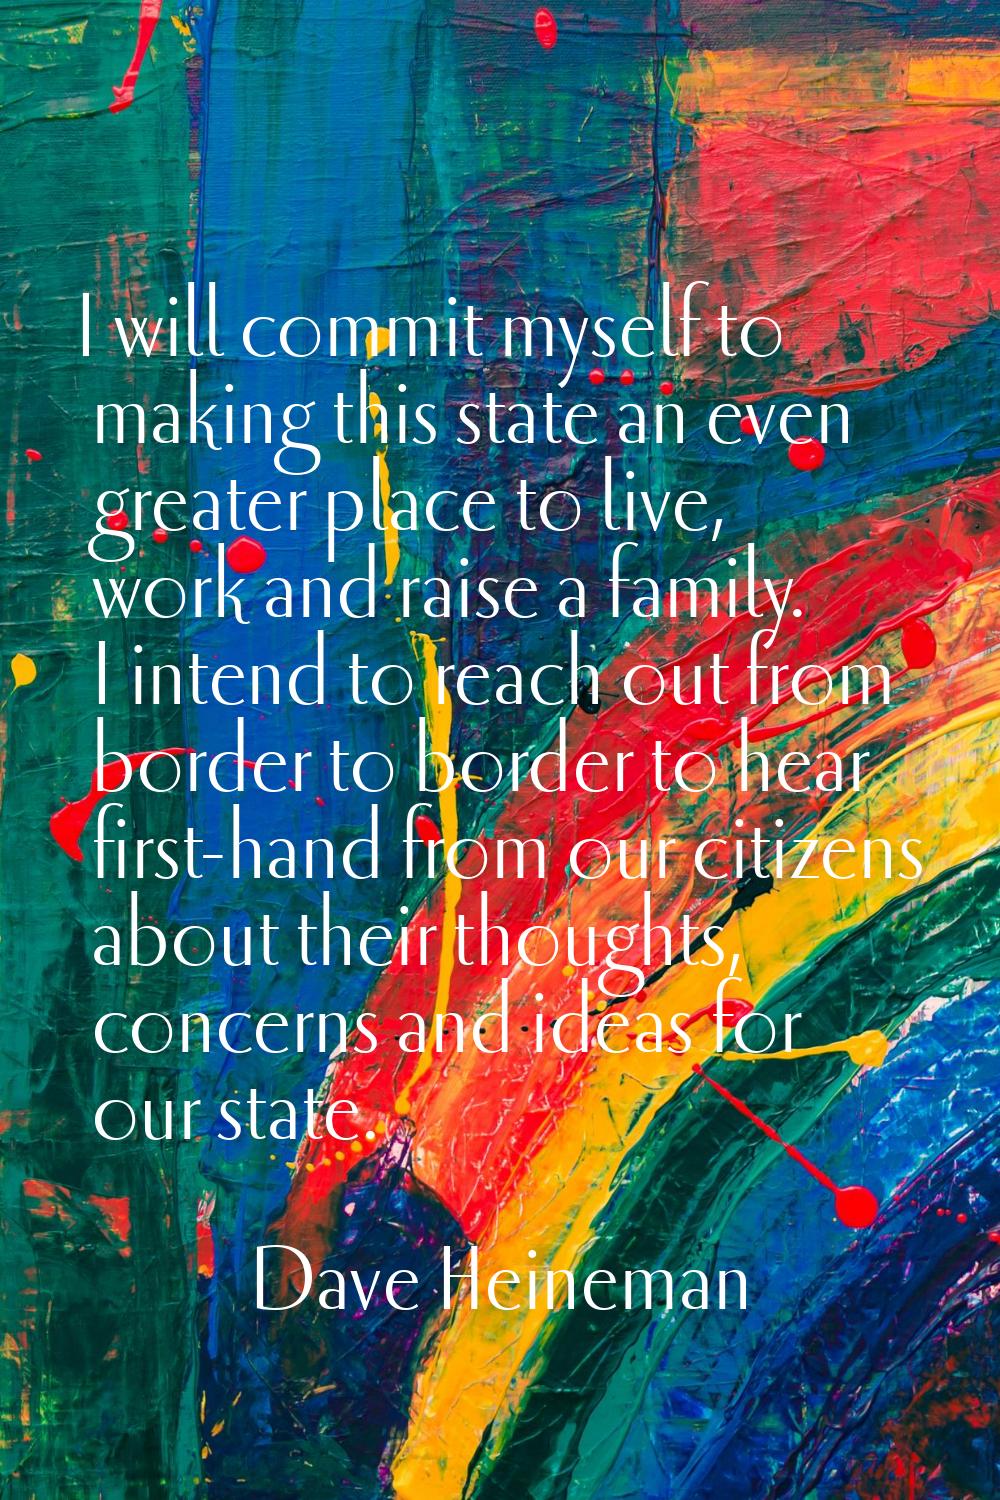 I will commit myself to making this state an even greater place to live, work and raise a family. I